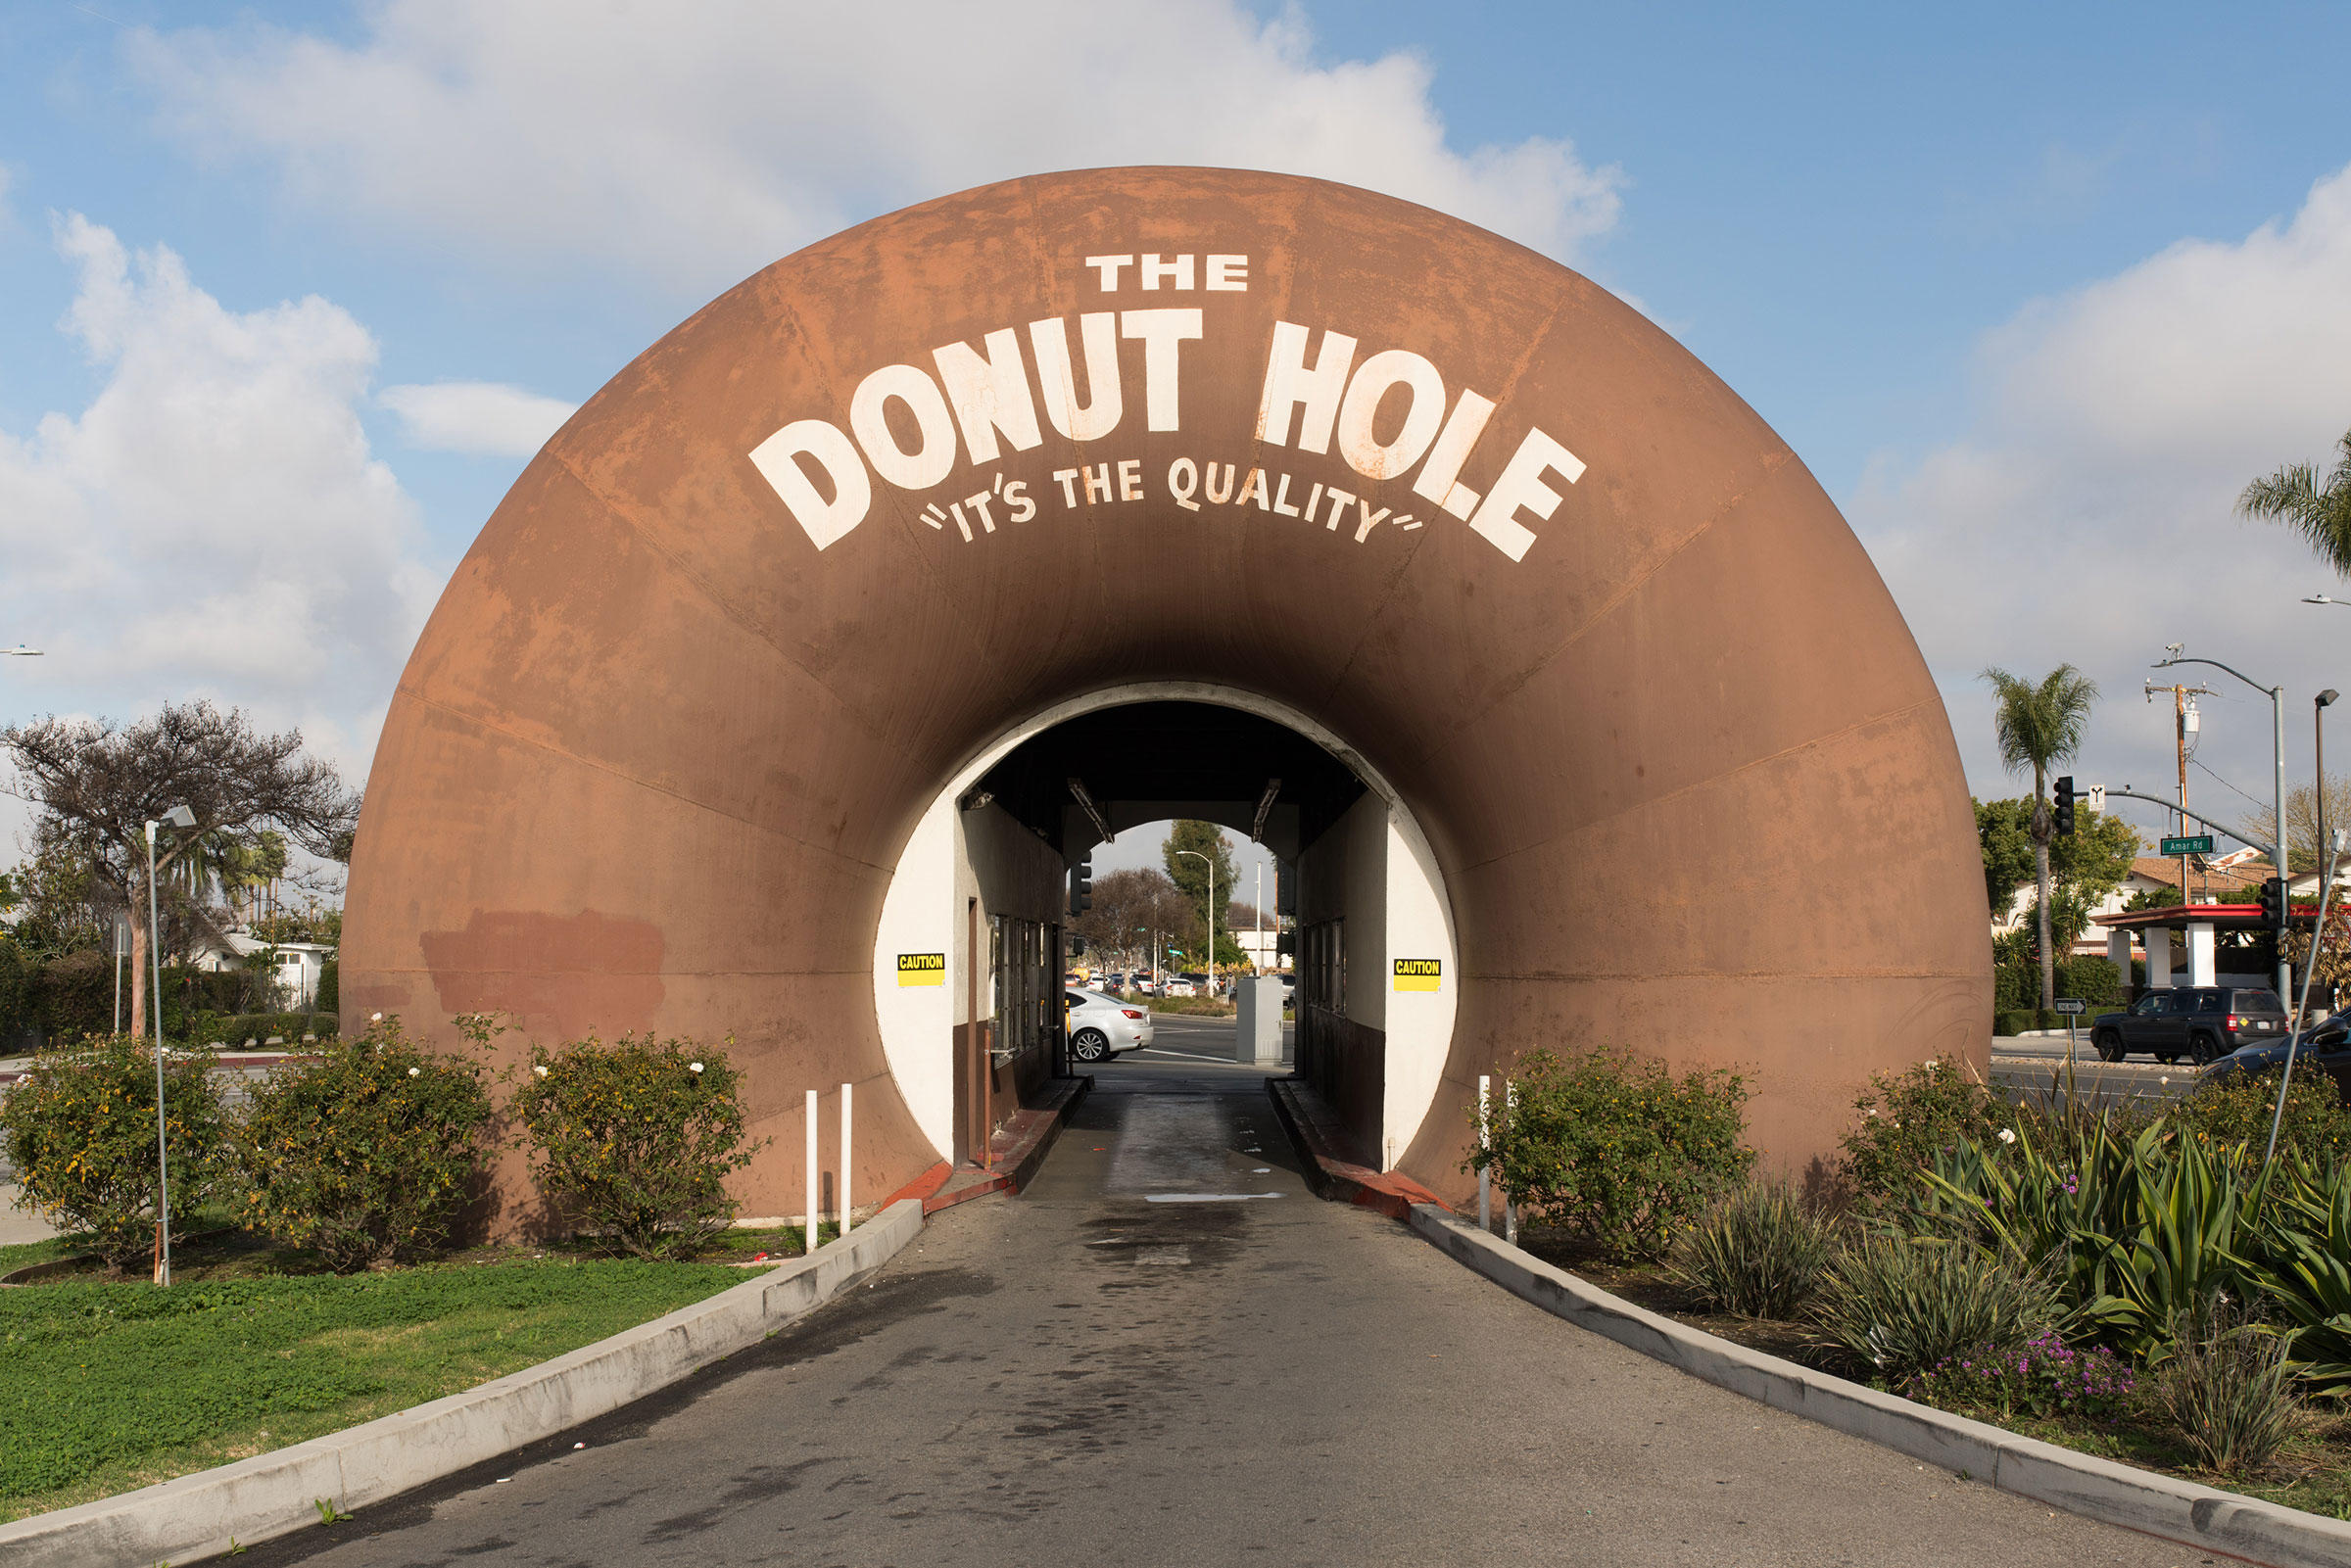 The drive-thru at The Donut Hole, built in 1968, in La Puente, CA (Theo Stroomer)